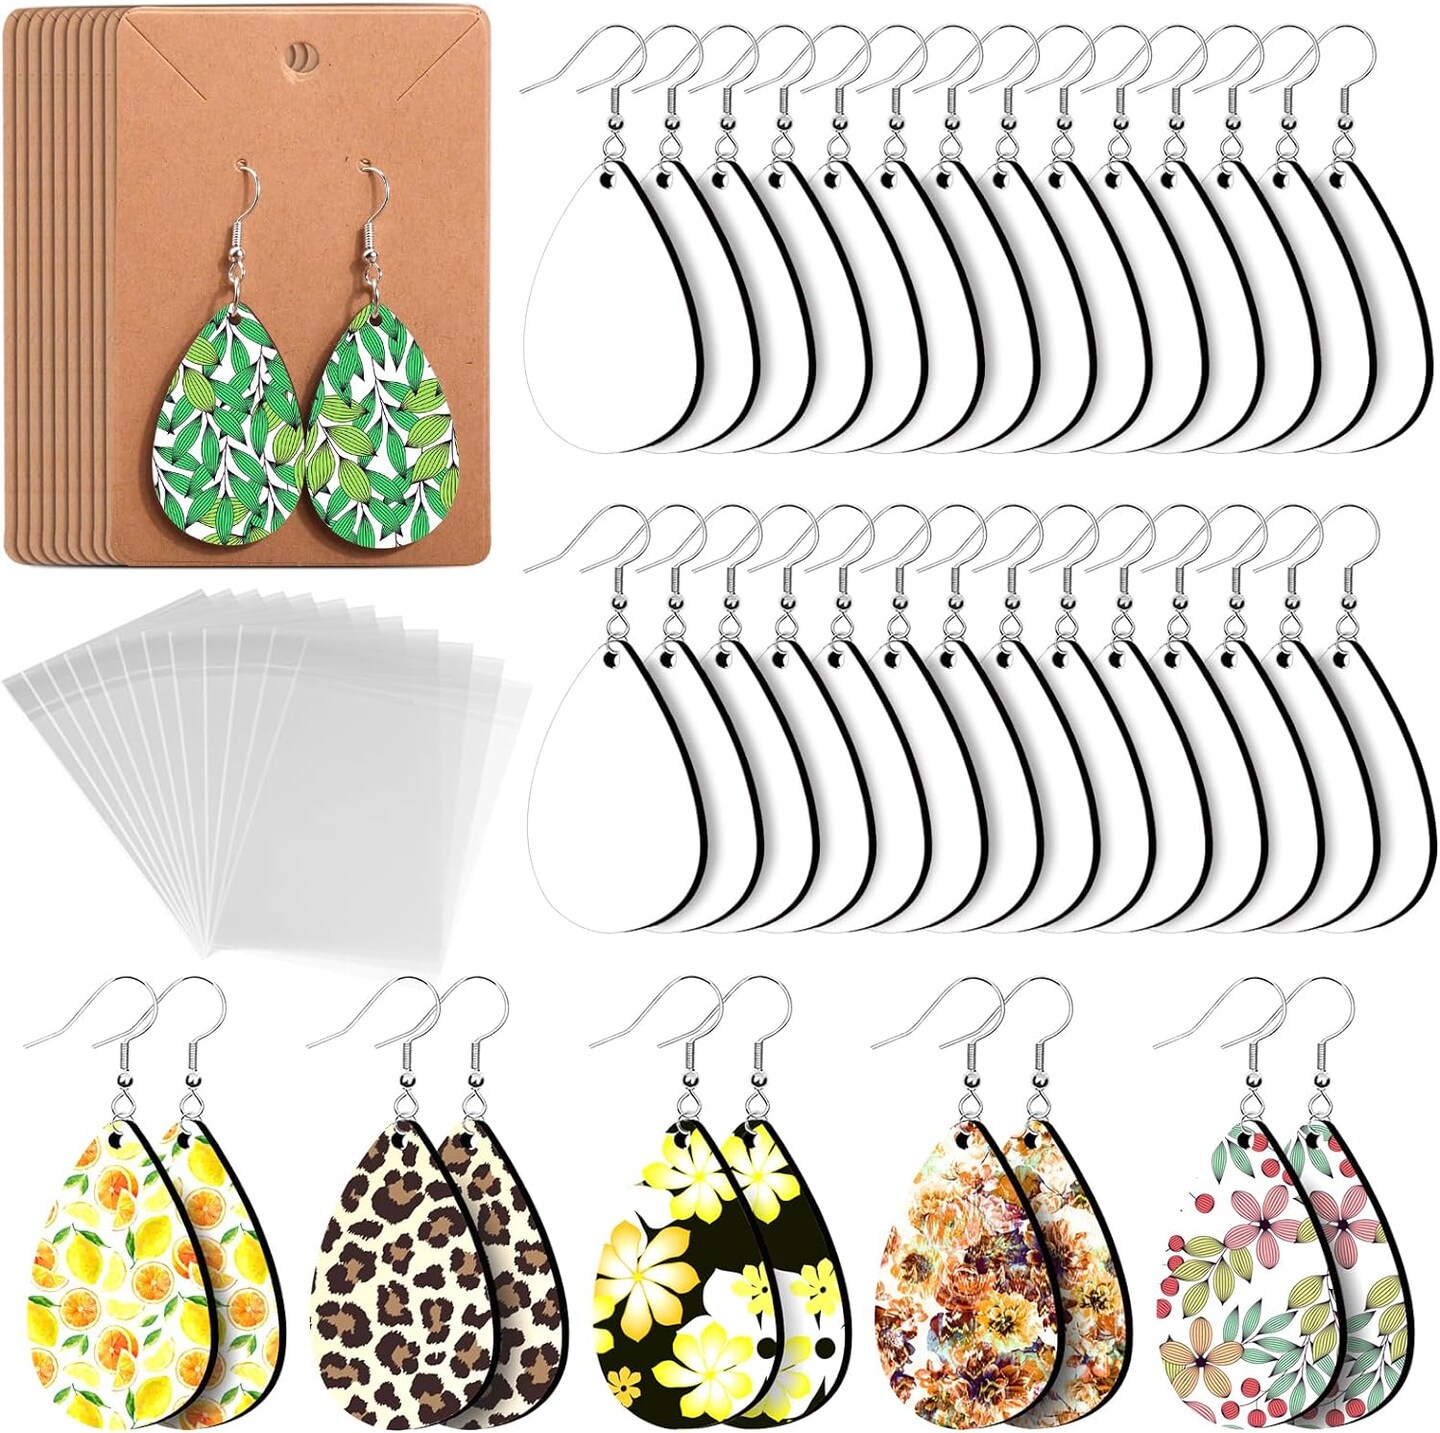 50pcs Sublimation Blanks Products - Sublimation Earring Blanks with Earring Hooks and Jump Rings for Halloween Christmas Women Girls DIY Earring Project Sublimation Accessories